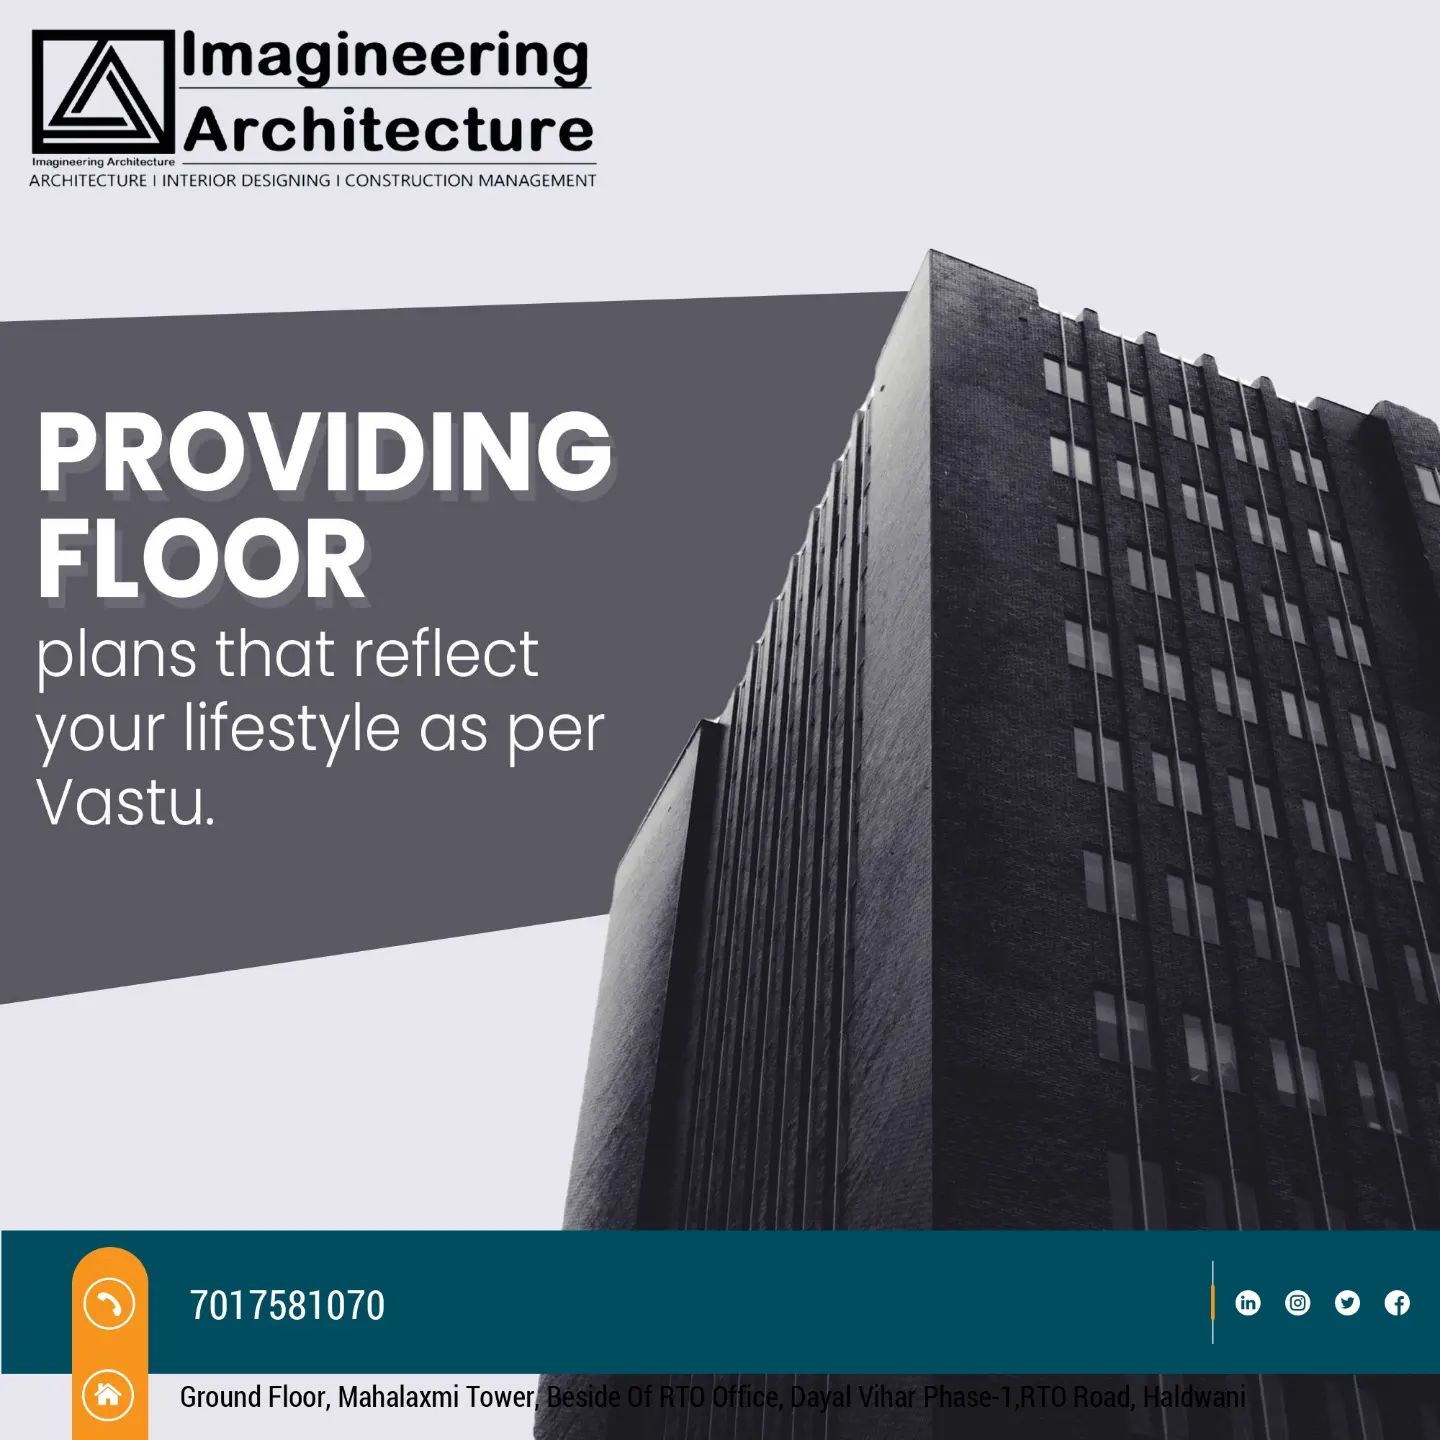 IMAGINEERING ARCHITECTURE|Architect|Professional Services